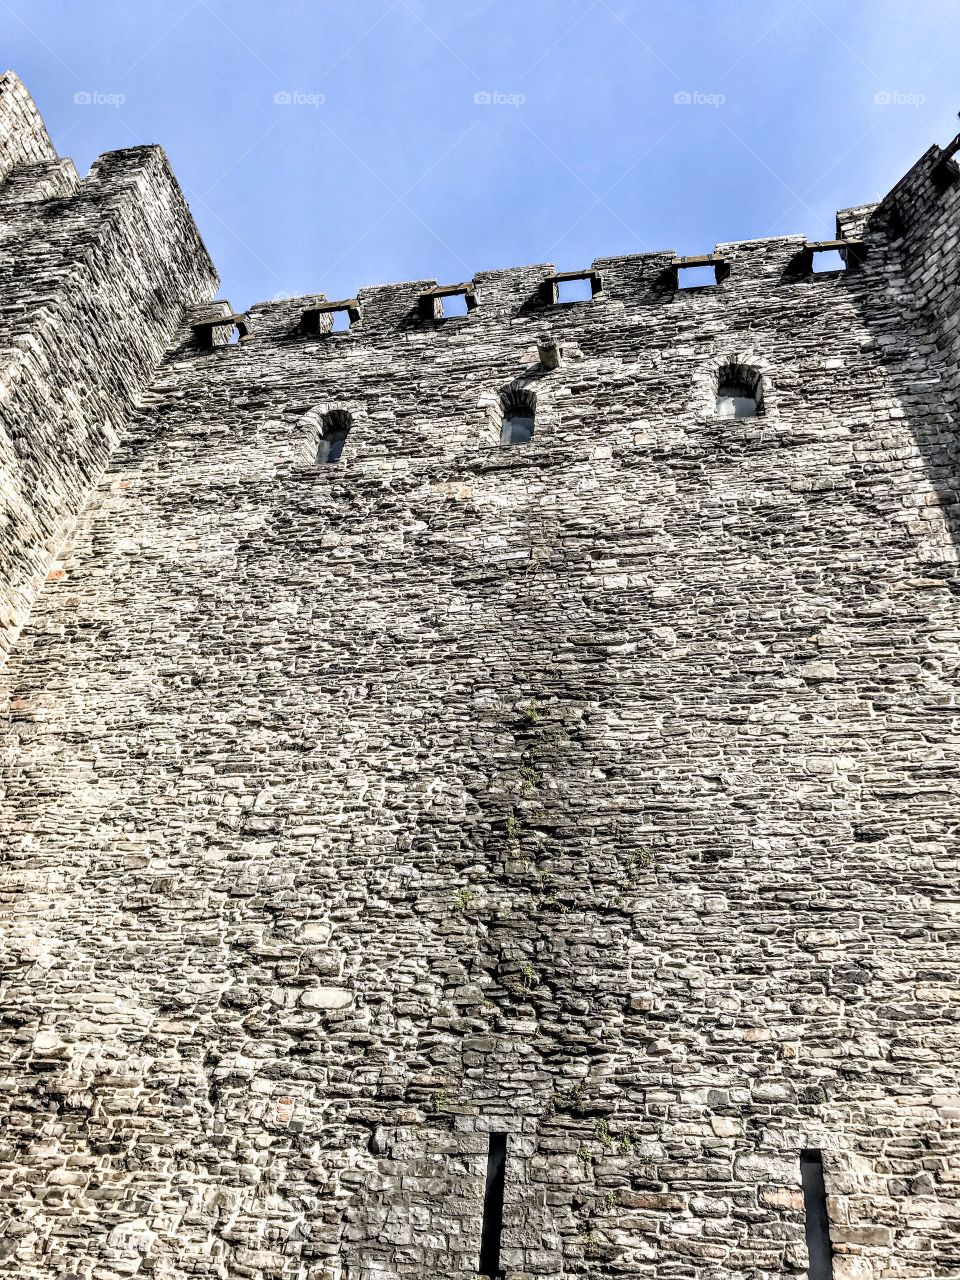 Wall of 12th century Fortress “Gravensteen” / Castle of the Counts - Ghent, Belgium 